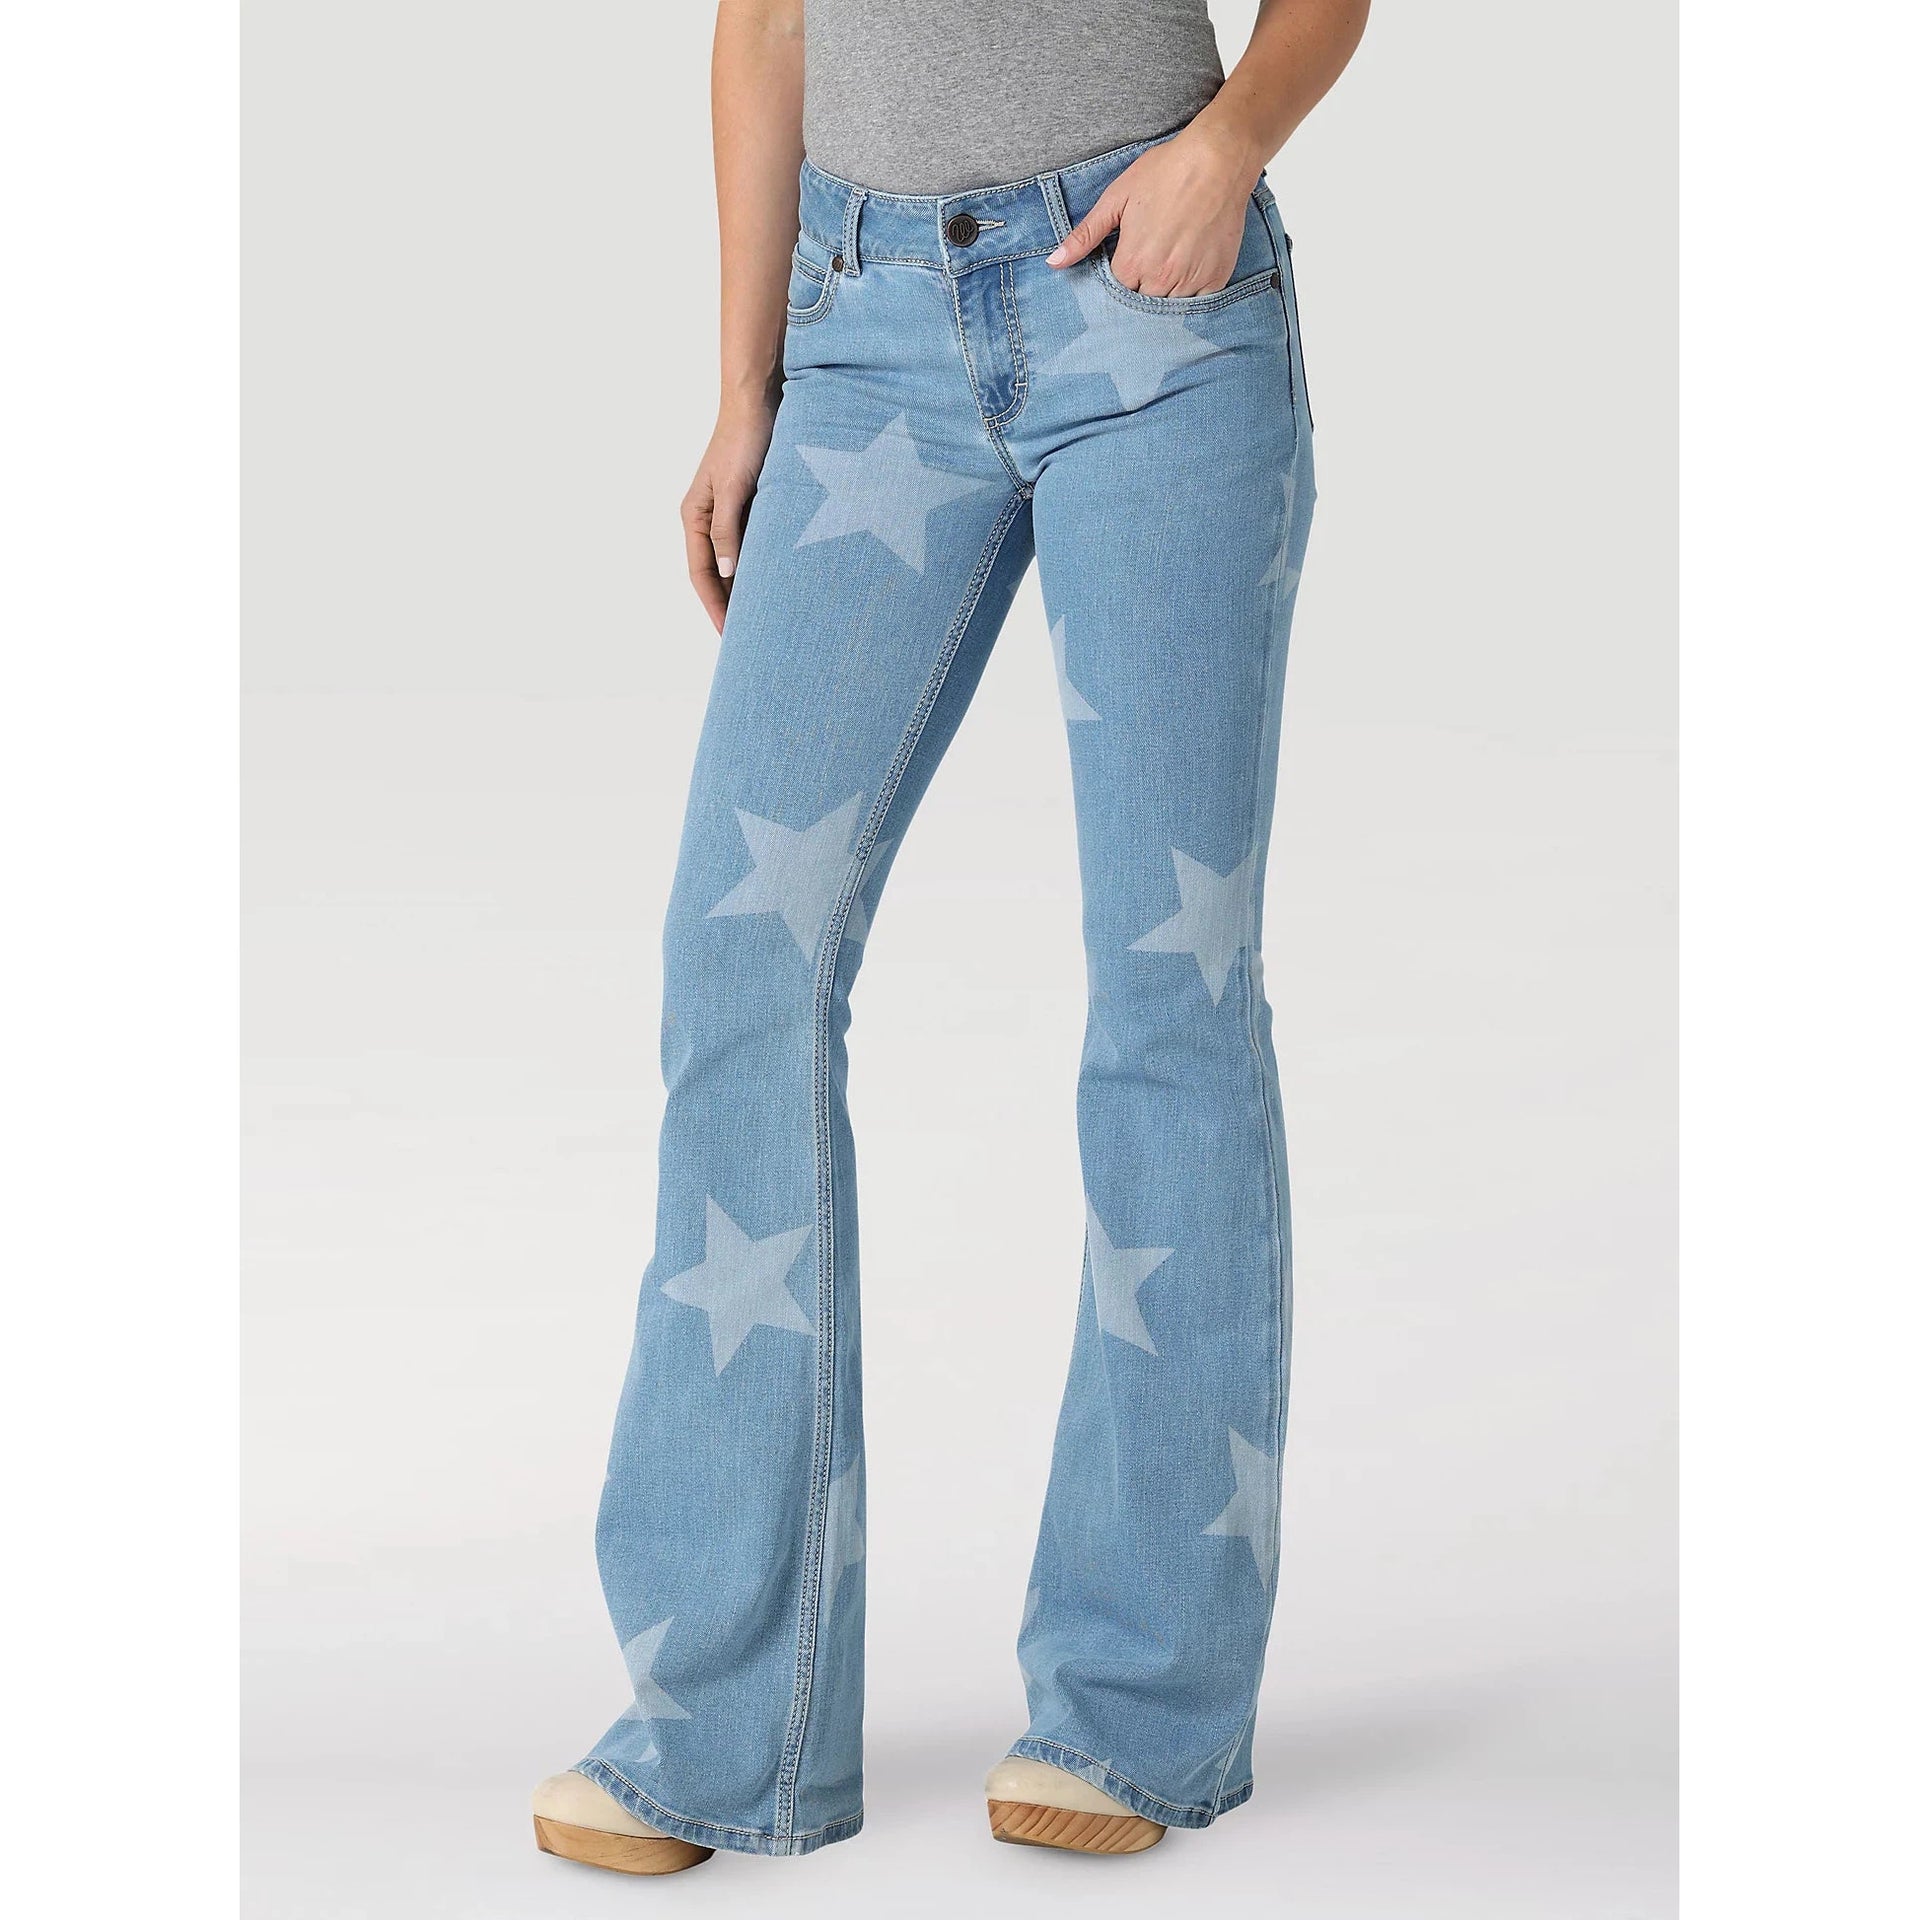 Reduced RQYYD Bell Bottom Flare Jeans for Womens Vintage Chic